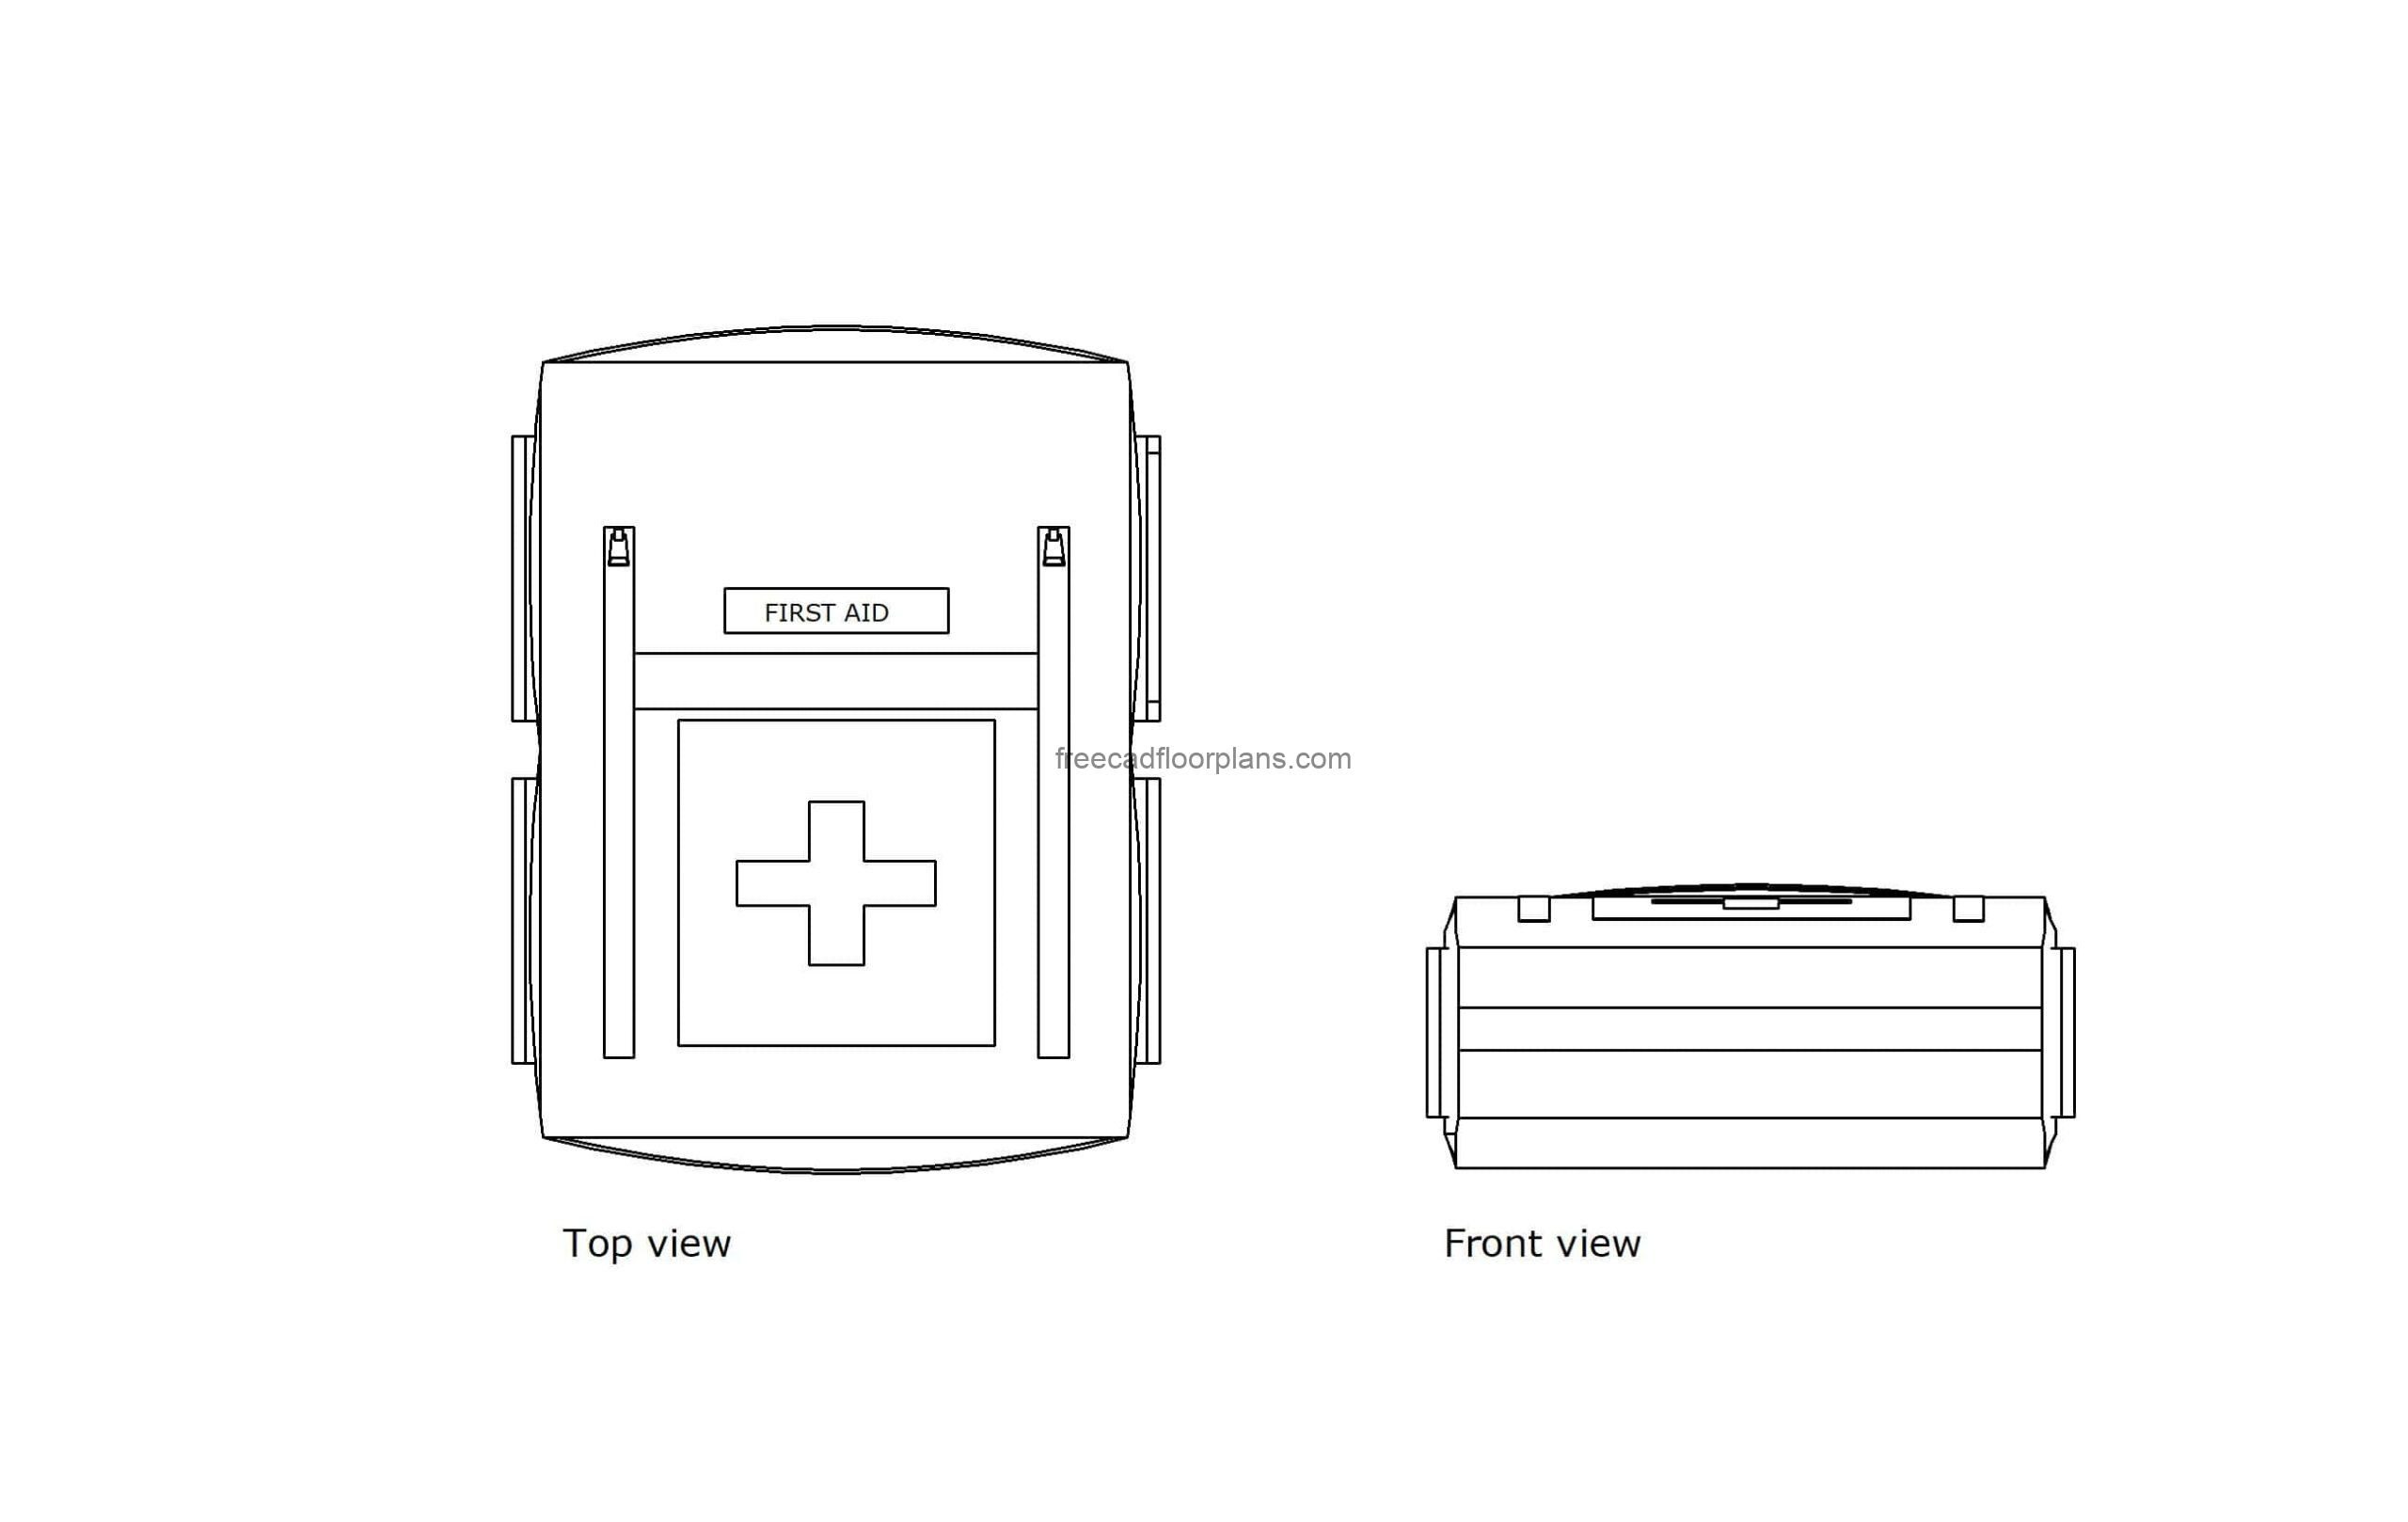 autocad drawing of a first aid kit, plan and elevation 2d views, dwg file for free download